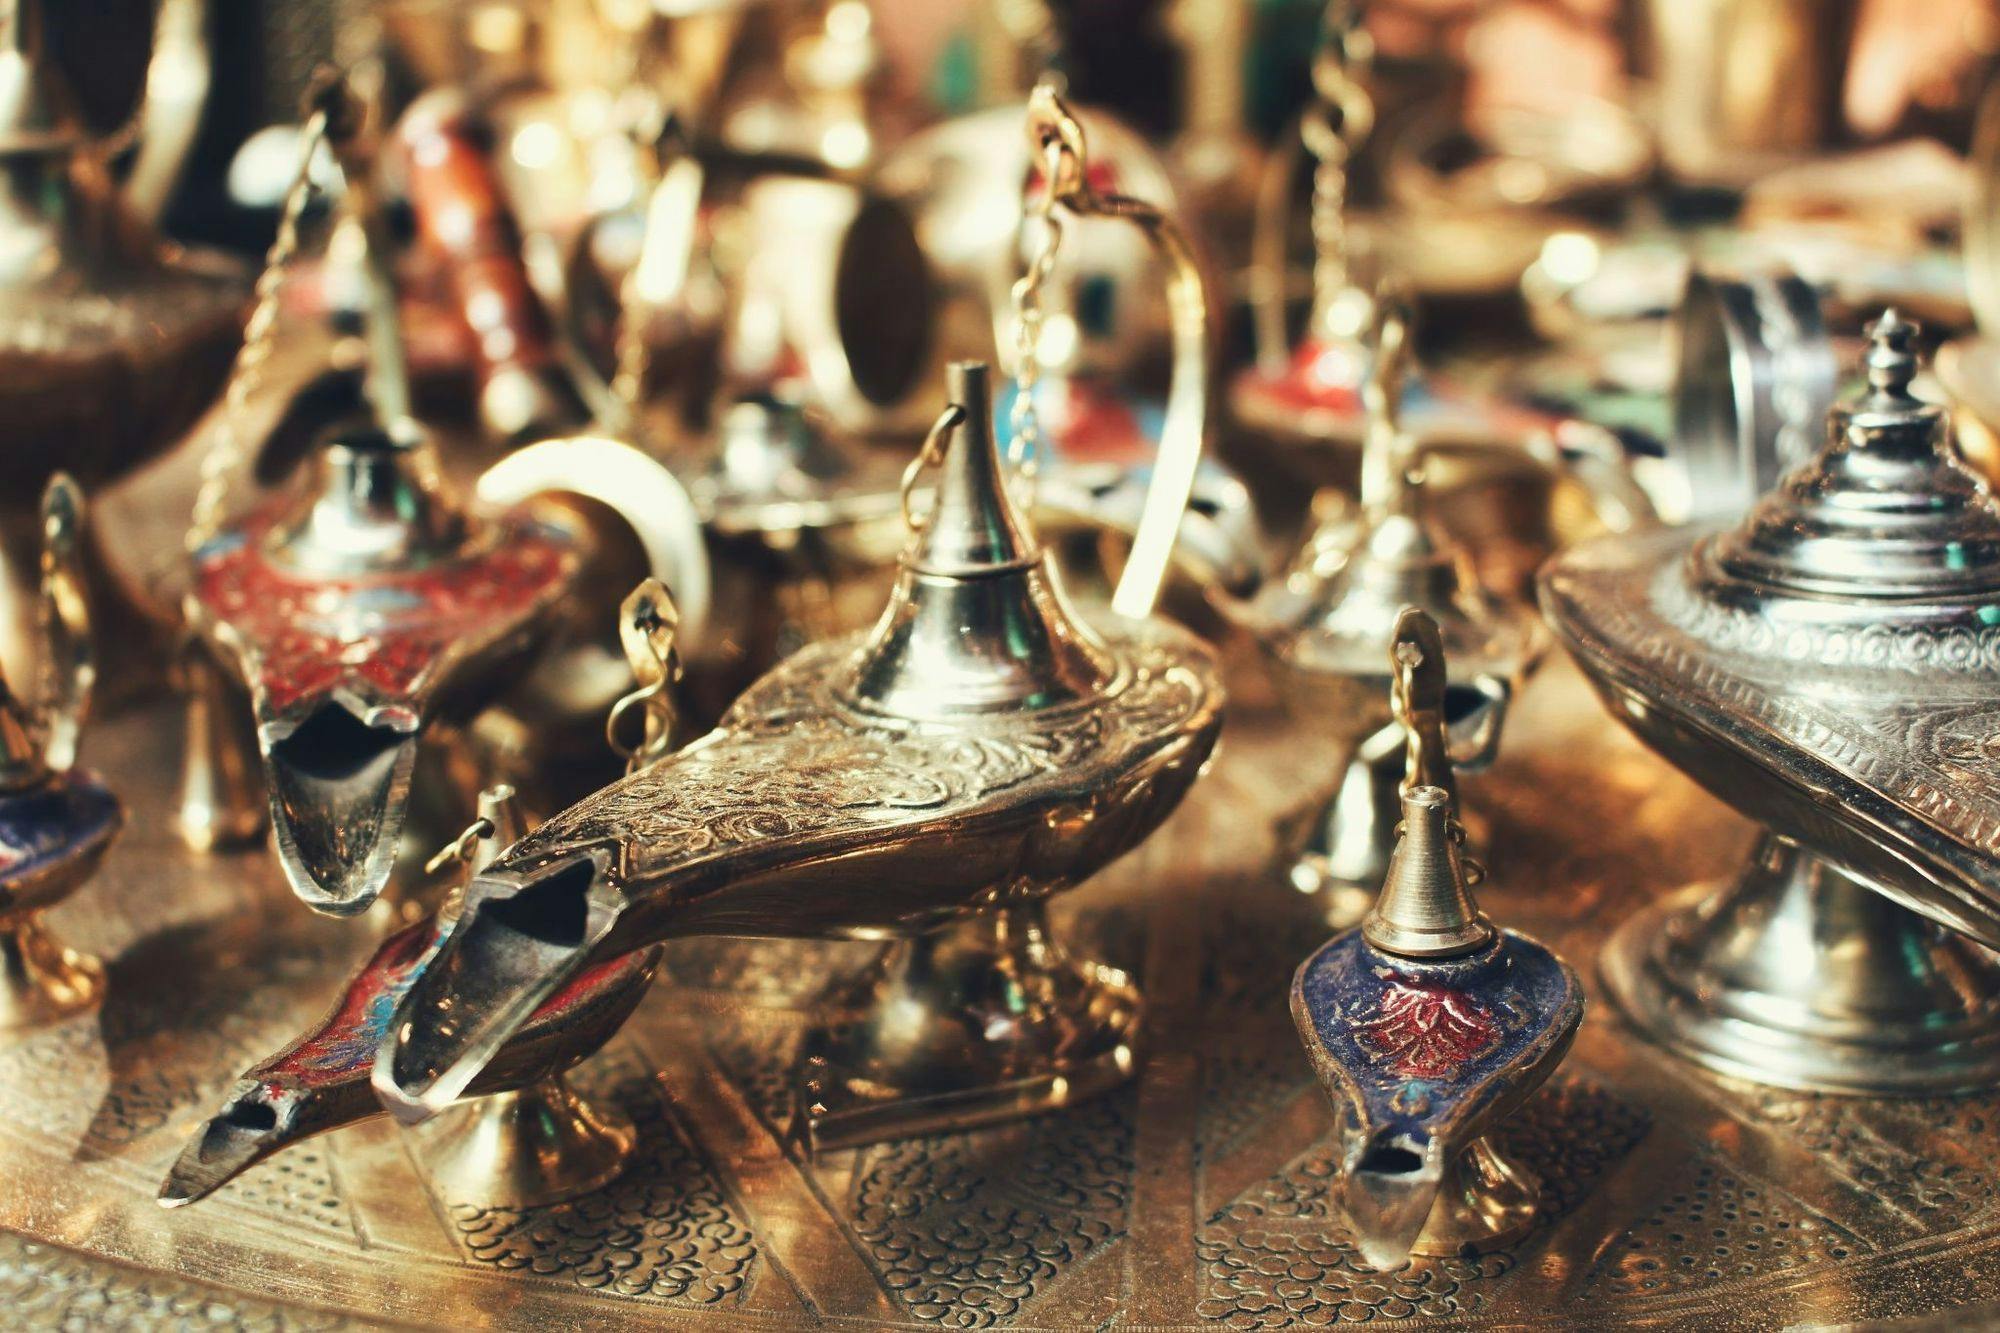 Stock photo of oil lamps